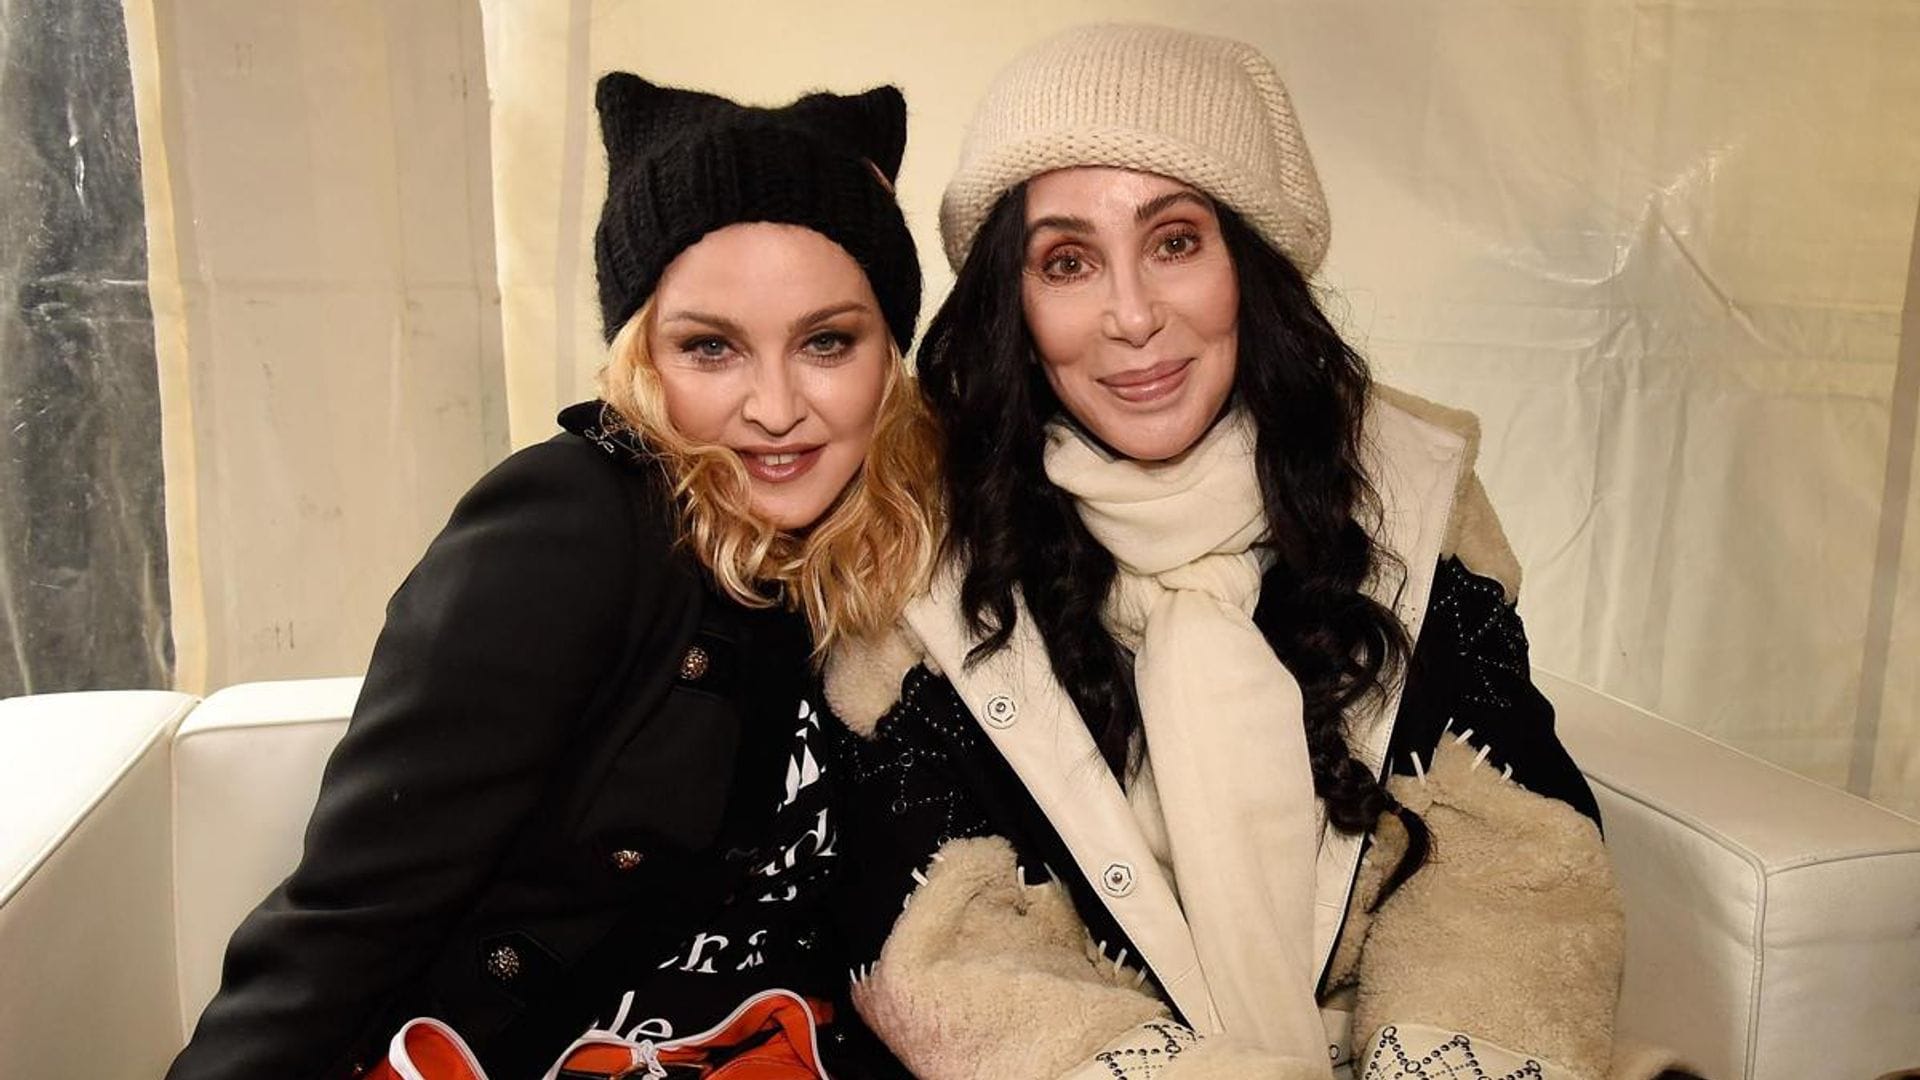 Cher says she has ‘no beef’ with Madonna after old video resurfaces